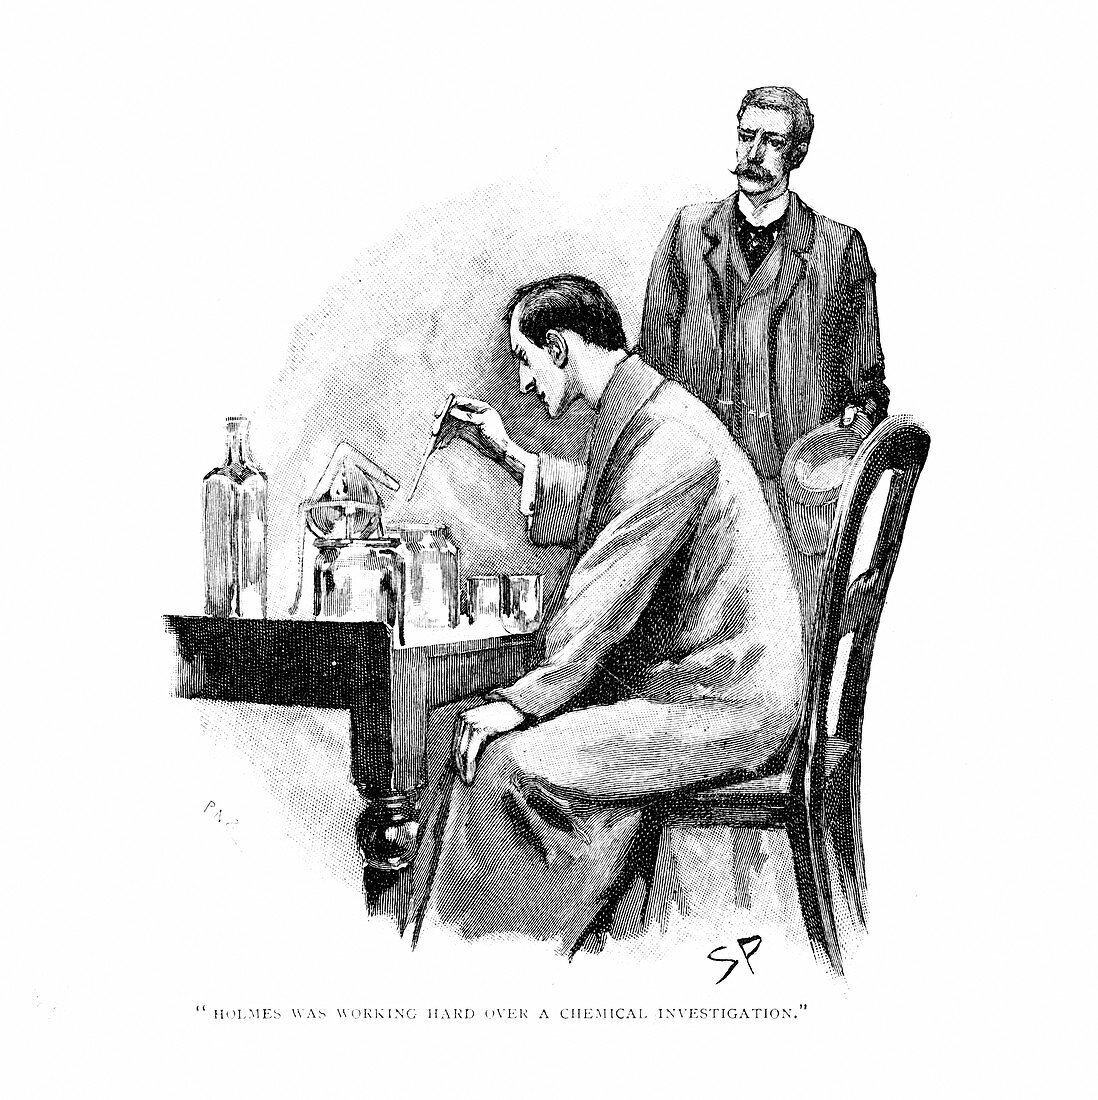 Holmes was working Hard over a Chemical Investigation, 1893